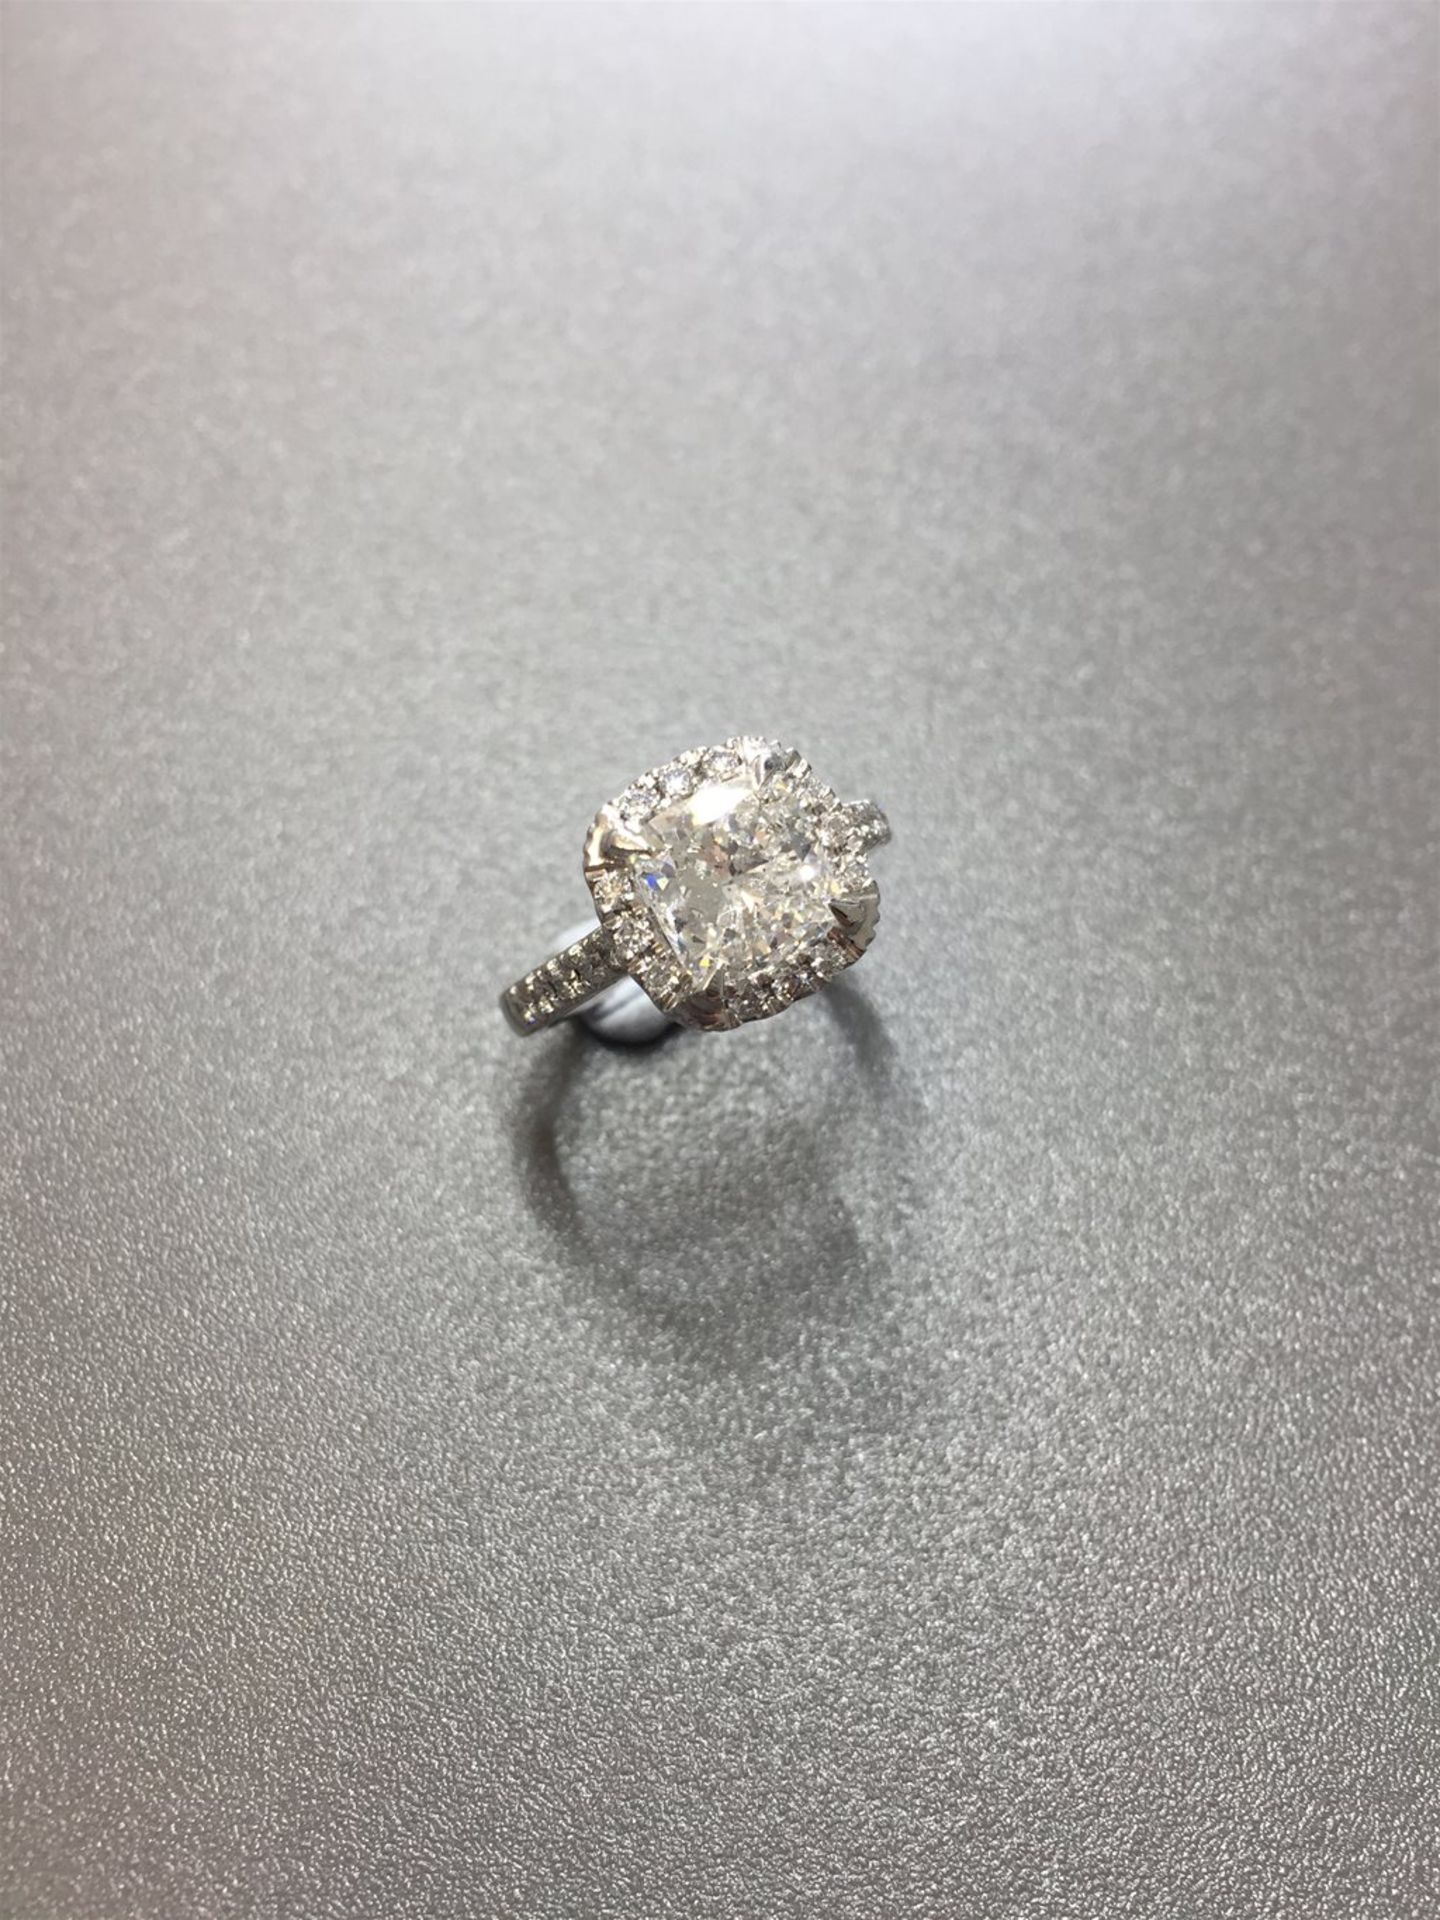 2.11ct diamond set solitaire with a cushion cut diamond, E colour Si1 clarity. Set in platinum - Image 2 of 5